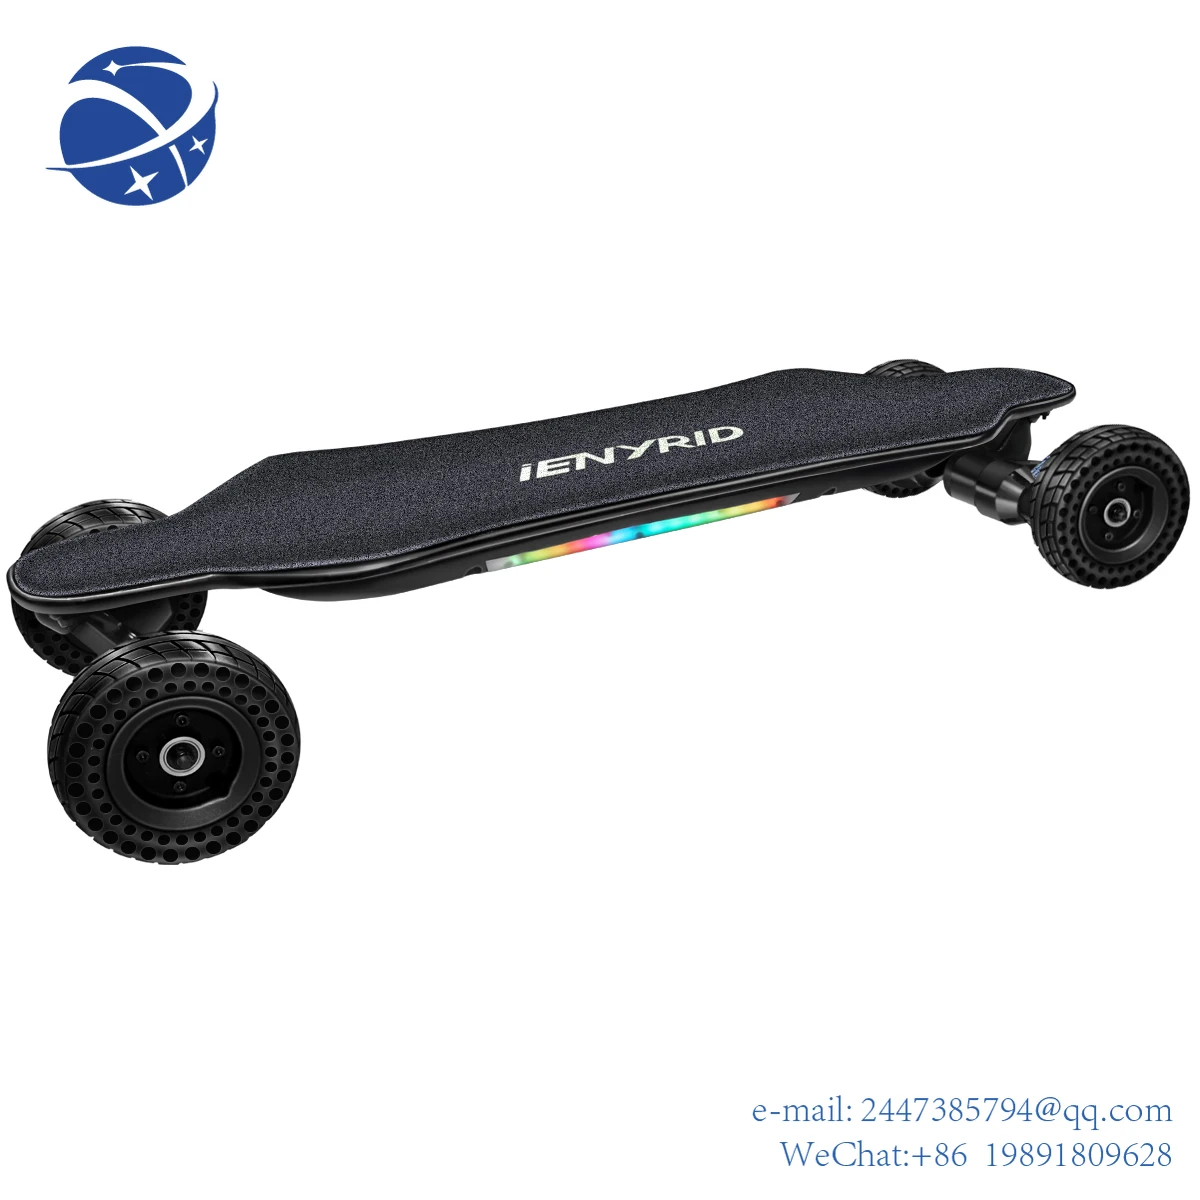 Yun YiUSA warehouse 4 wheel Electric SUV-skateboard Fast delivery time FCC ROHS CE electric skateboard is best antenna lnb holder ku band multi bracket for satellite dish antenna hold up to 4 ku band lnb fixture clamp fast delivery